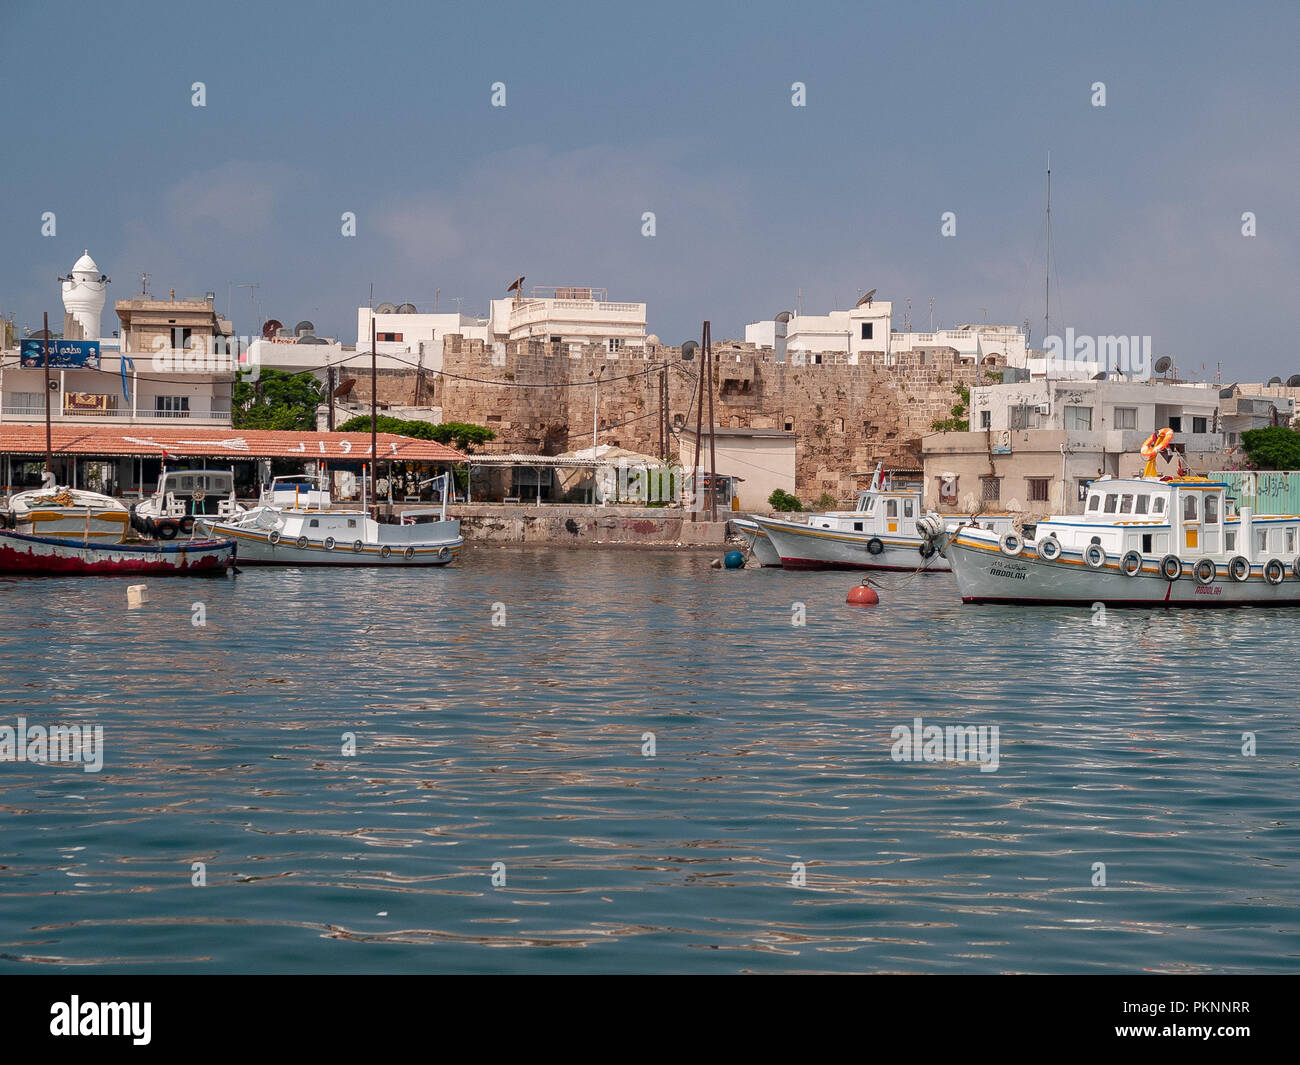 Arwad (Arados) is the only inhabited island in Syria. It is located in the Mediterranean Sea 3 km from Tartus. The town covers the entire island. Stock Photo